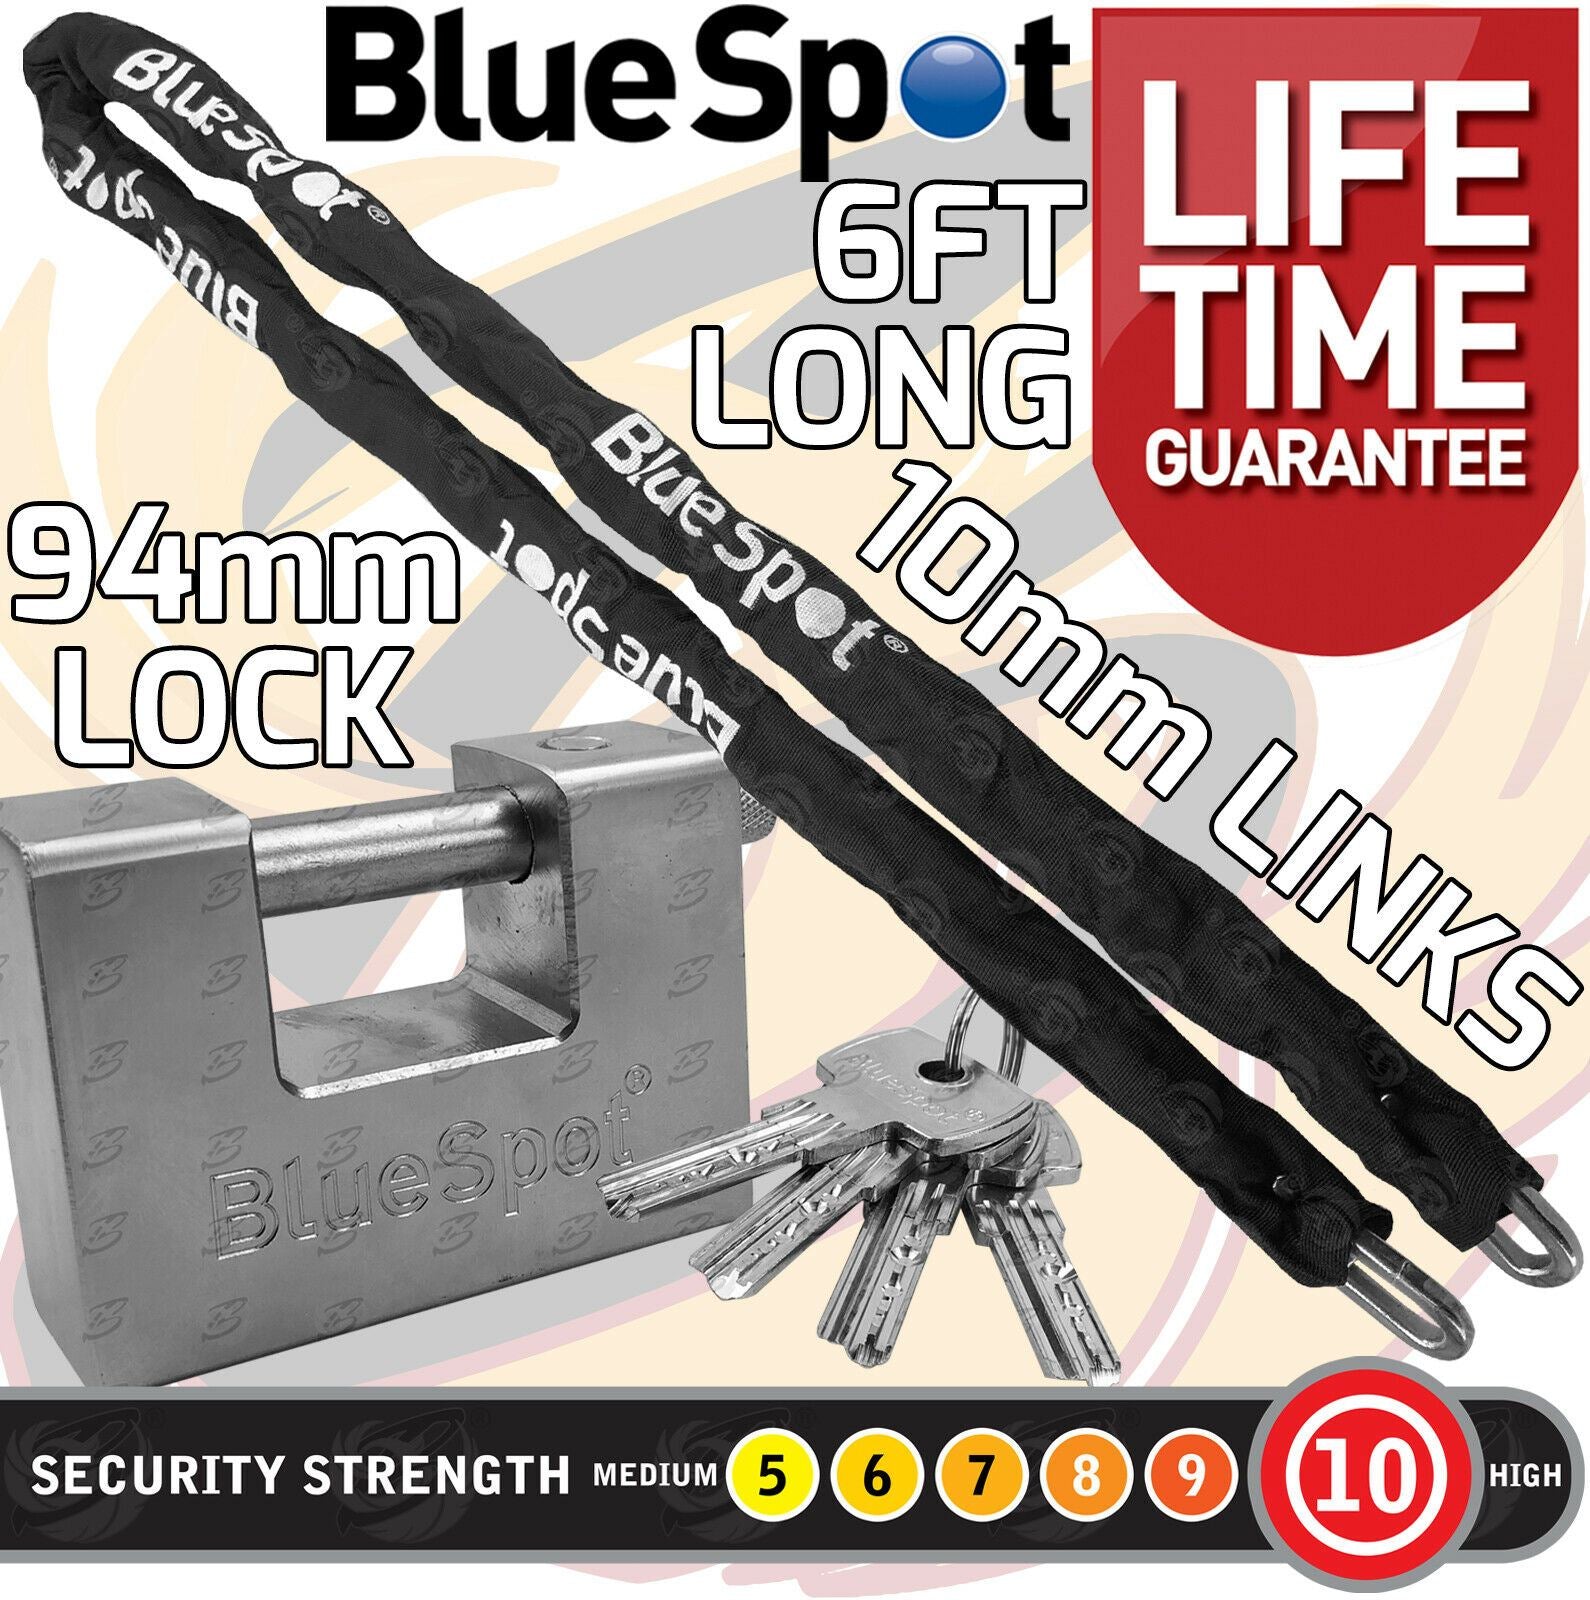 BLUESPOT 6FT LONG 10MM LINKS SECURITY CHAIN WITH 94MM HIGH SECURITY PADLOCK